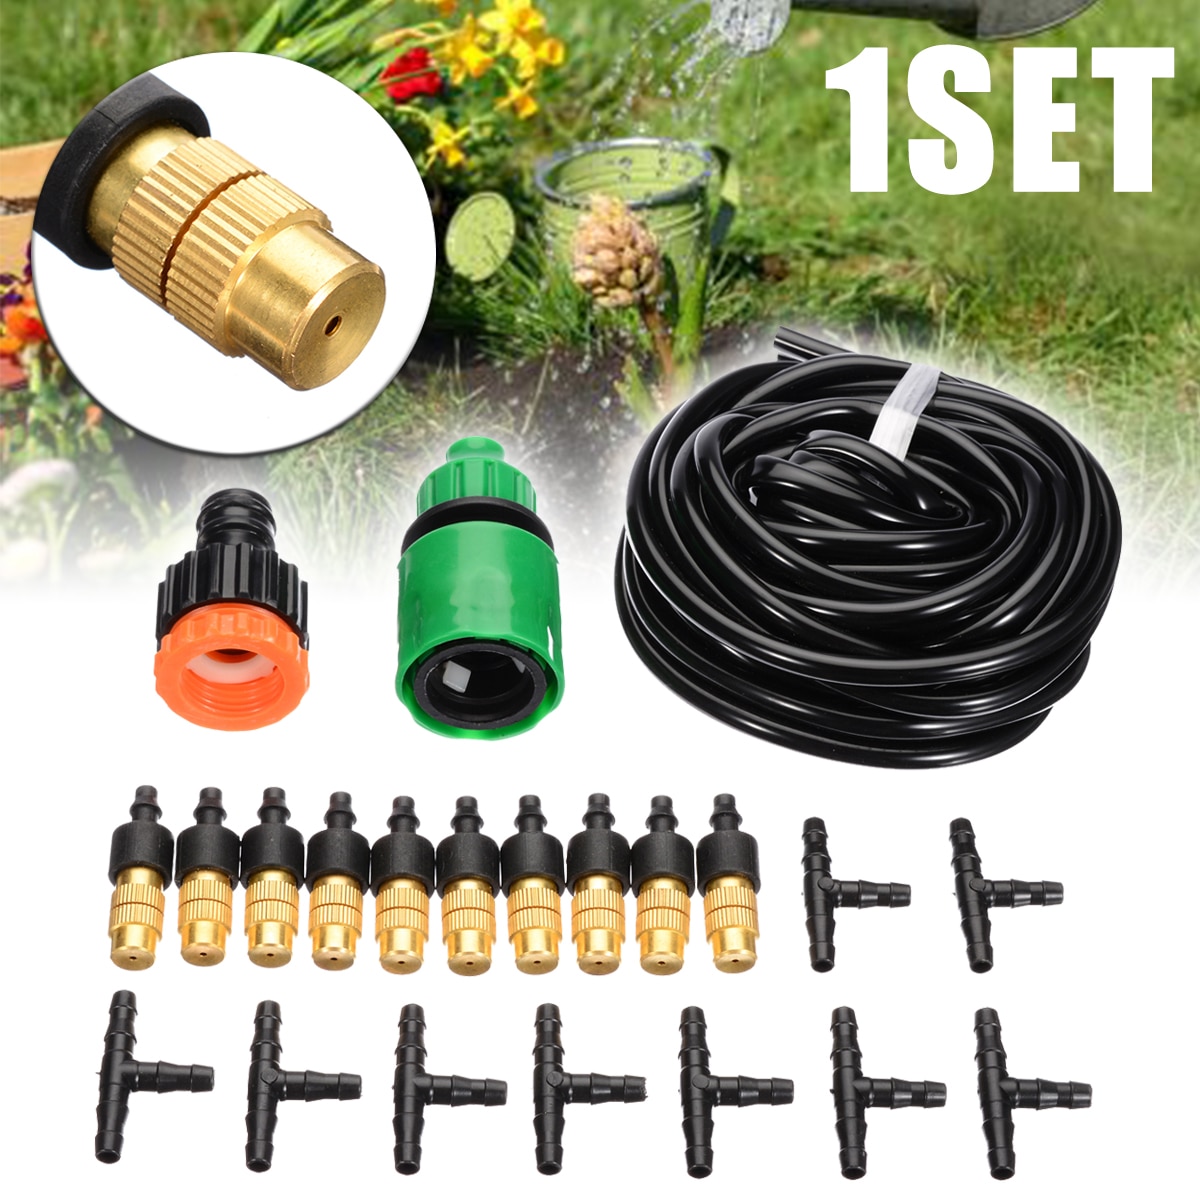 Mayitr 16ft Tuin Verneveling Cooling Systeem Patio Water Mister Nozzles Mist Sprinkler Slang Sproeikop Water Connection Kit